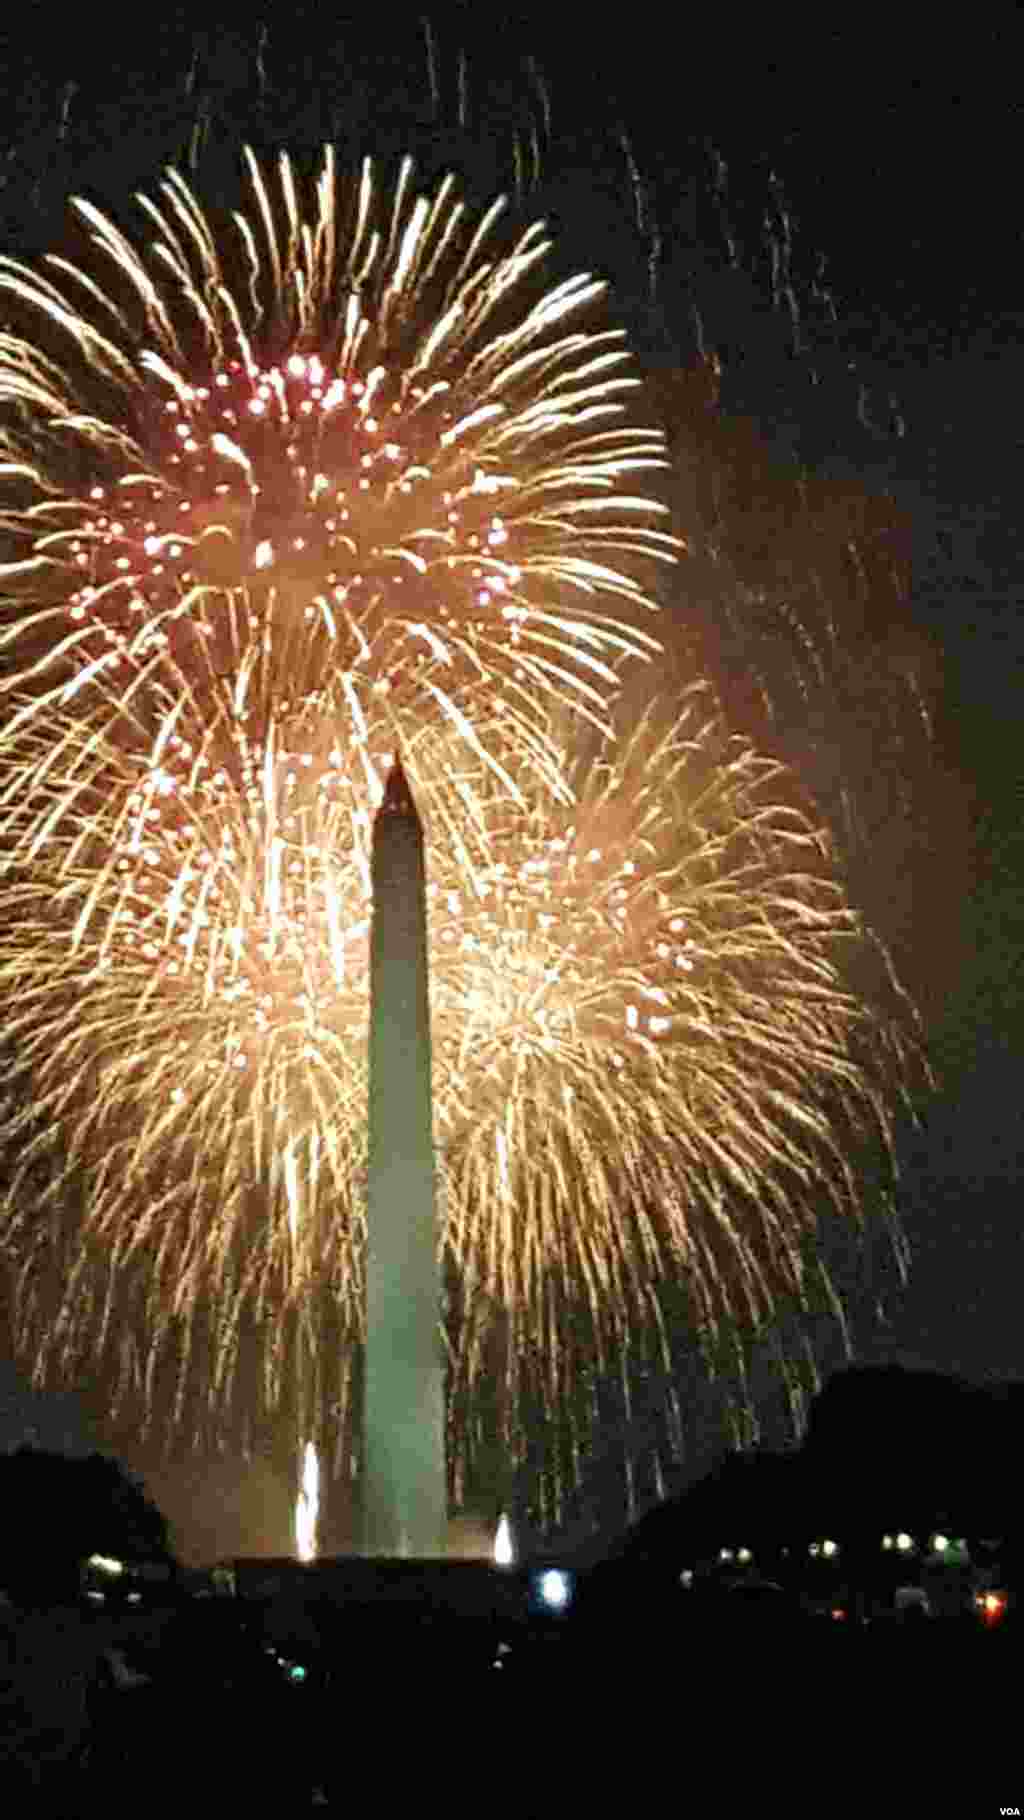 Fireworks explode over the National Mall, July 4, 2017. (M. Ngu for VOA)